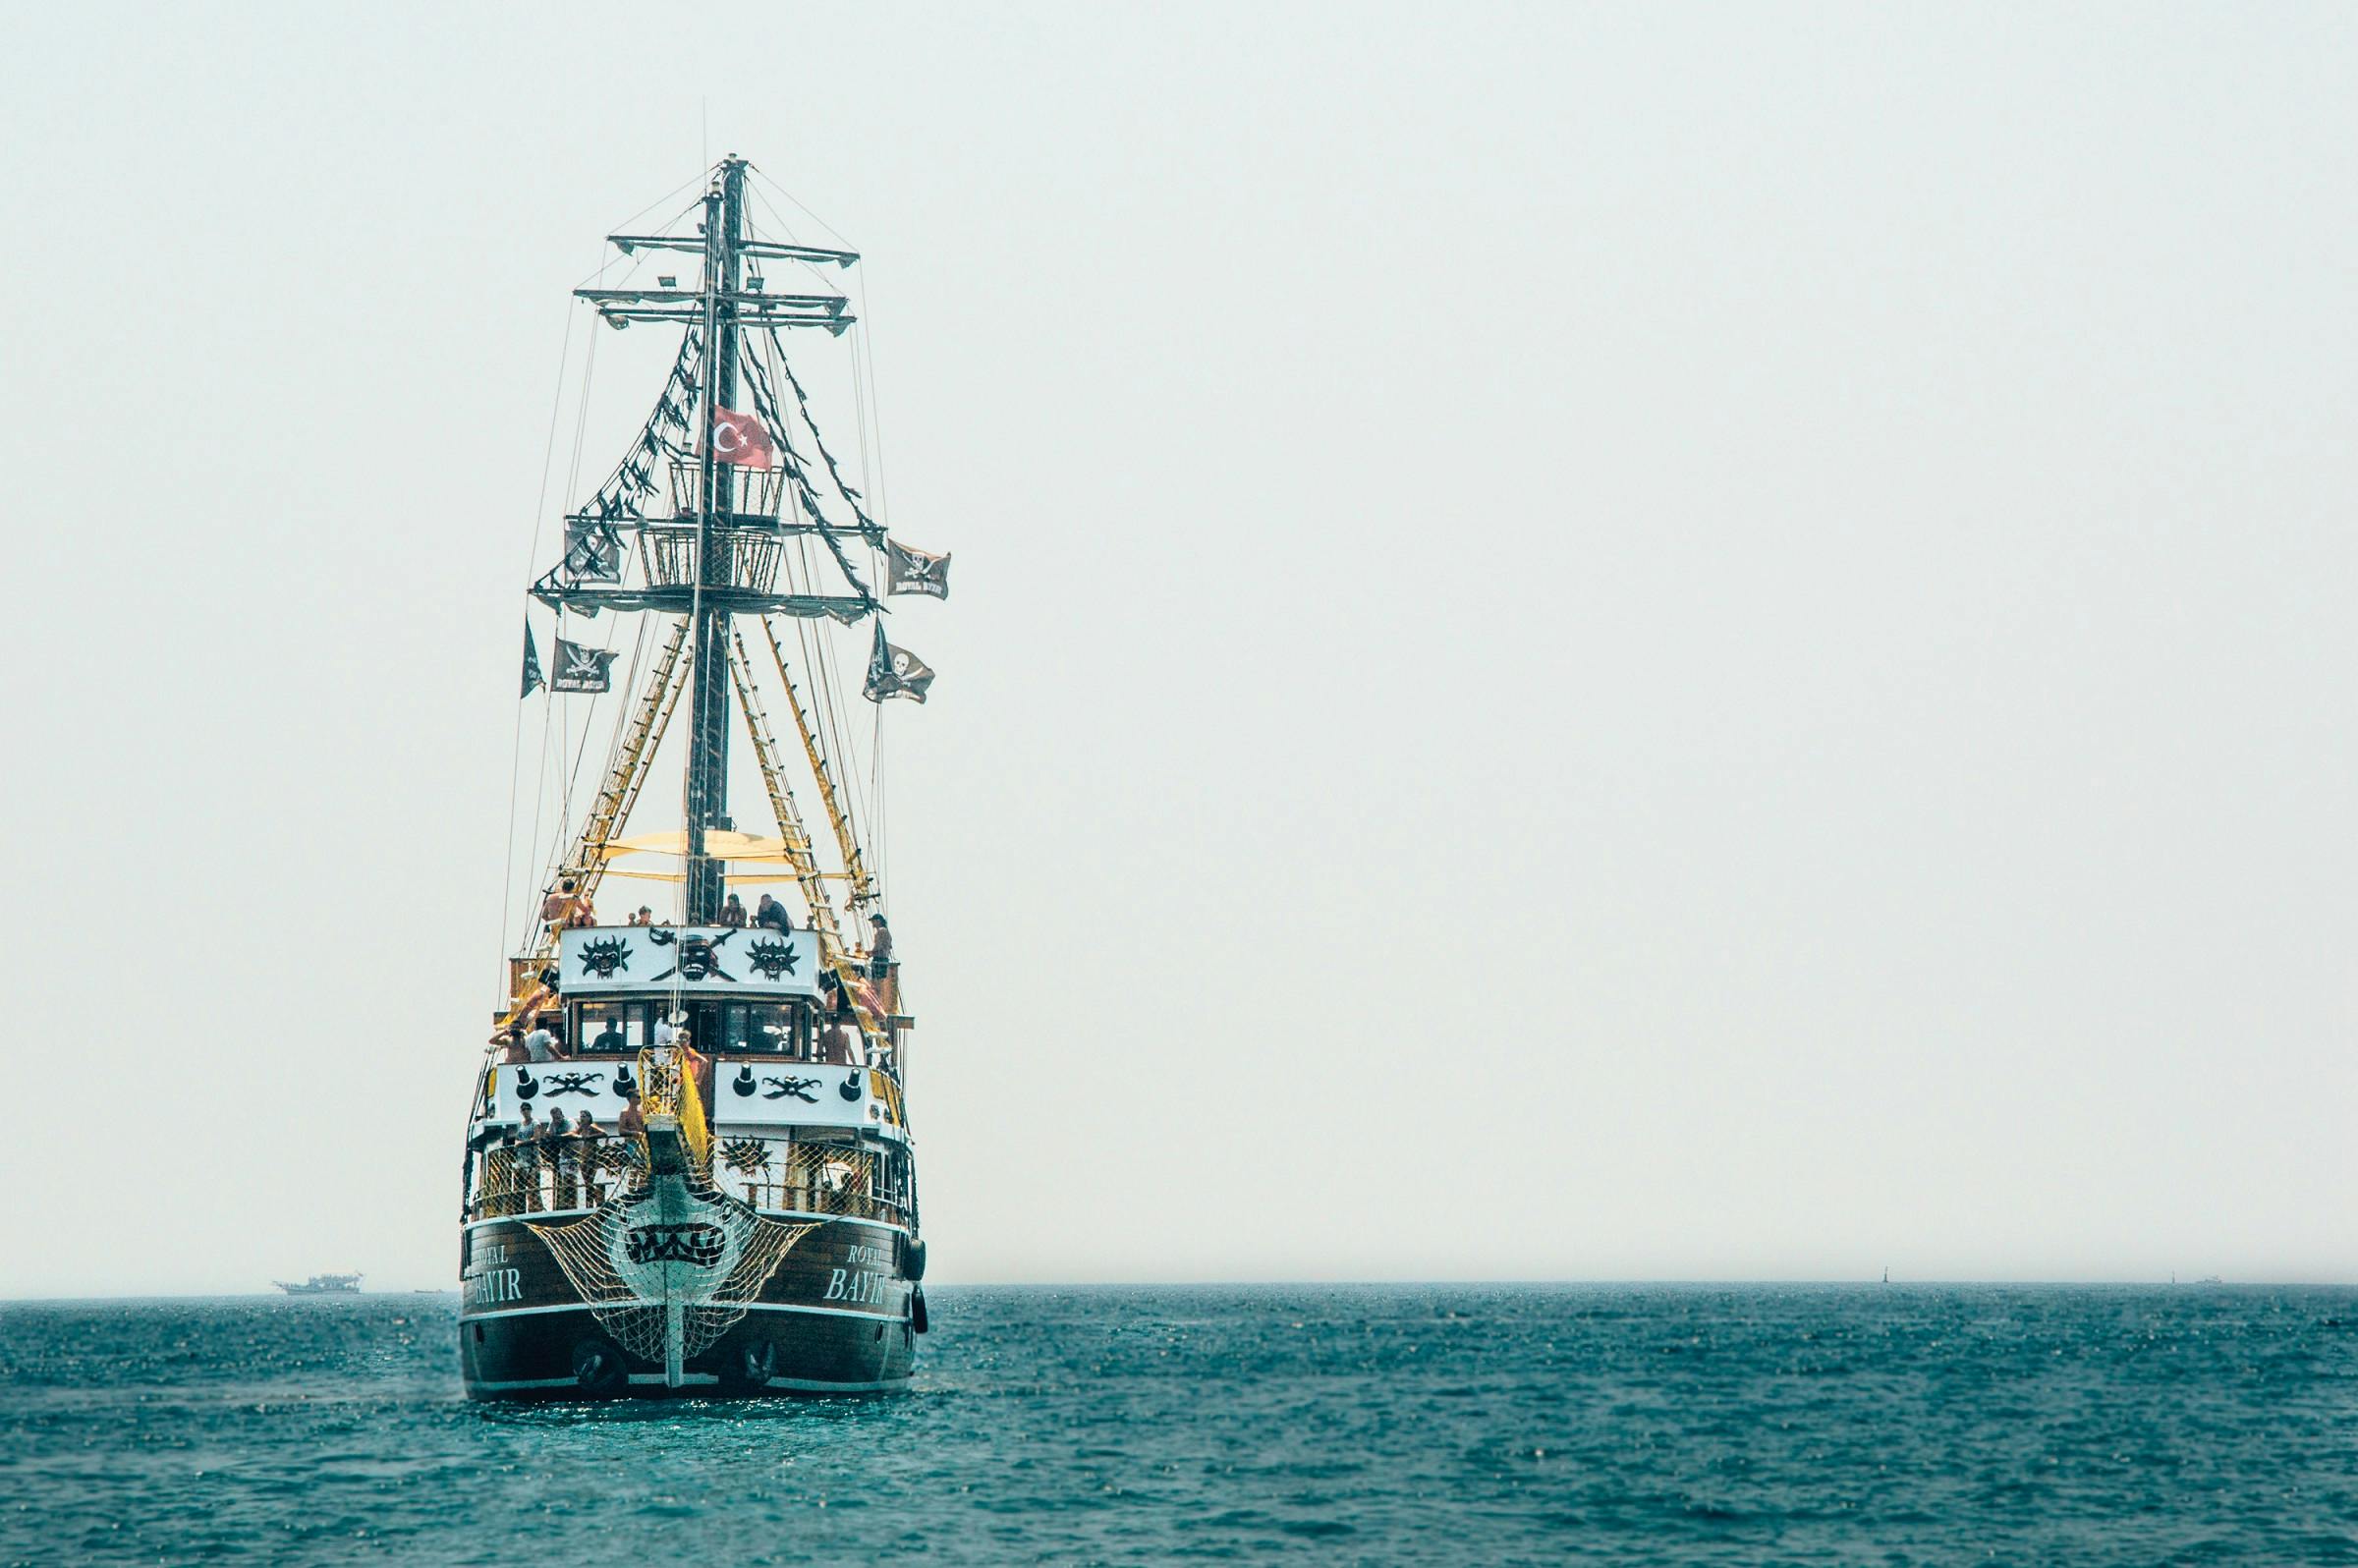 Kemer Pirate Boat Trip with Free Transfer from Antalya